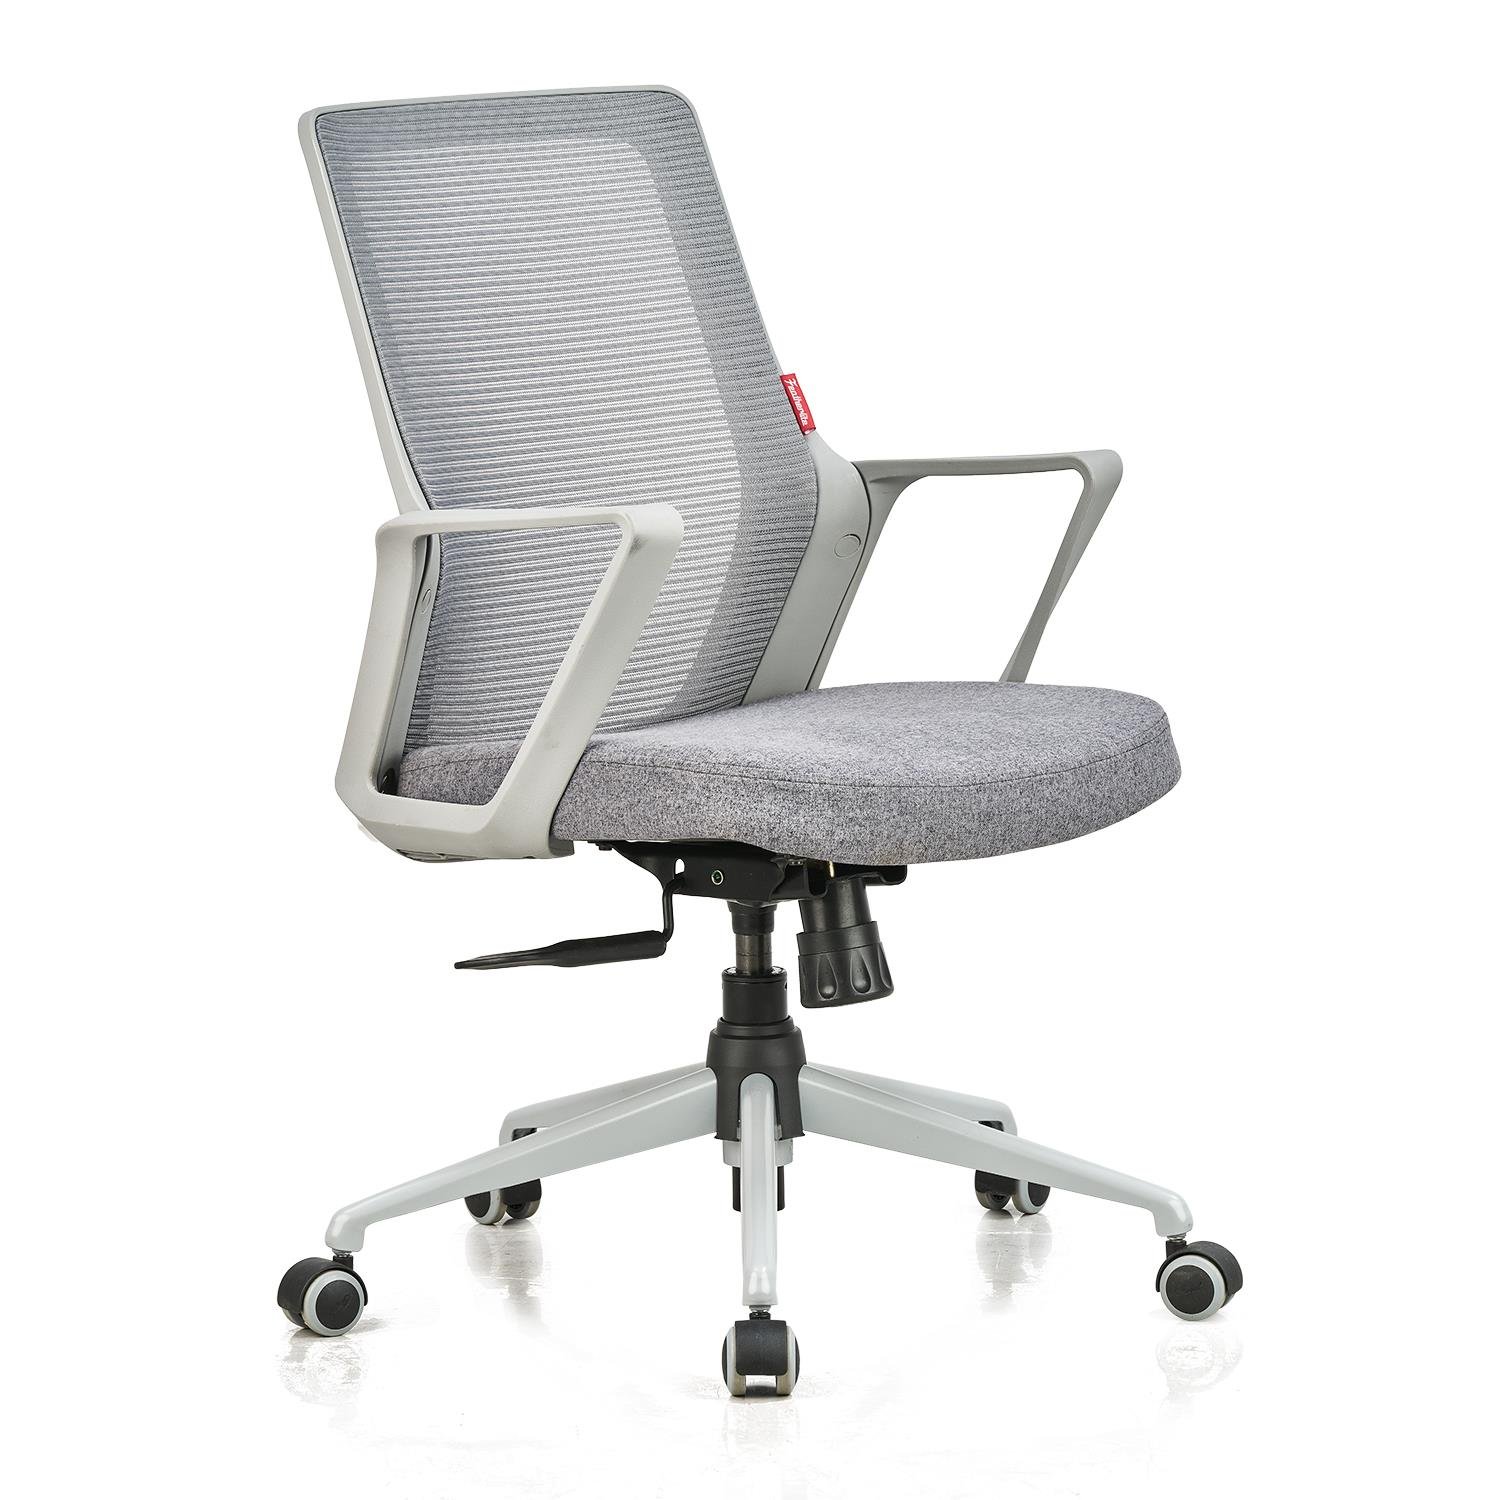 Featherlite Alpha Medium Back Fabric Office Arm Chair Price in